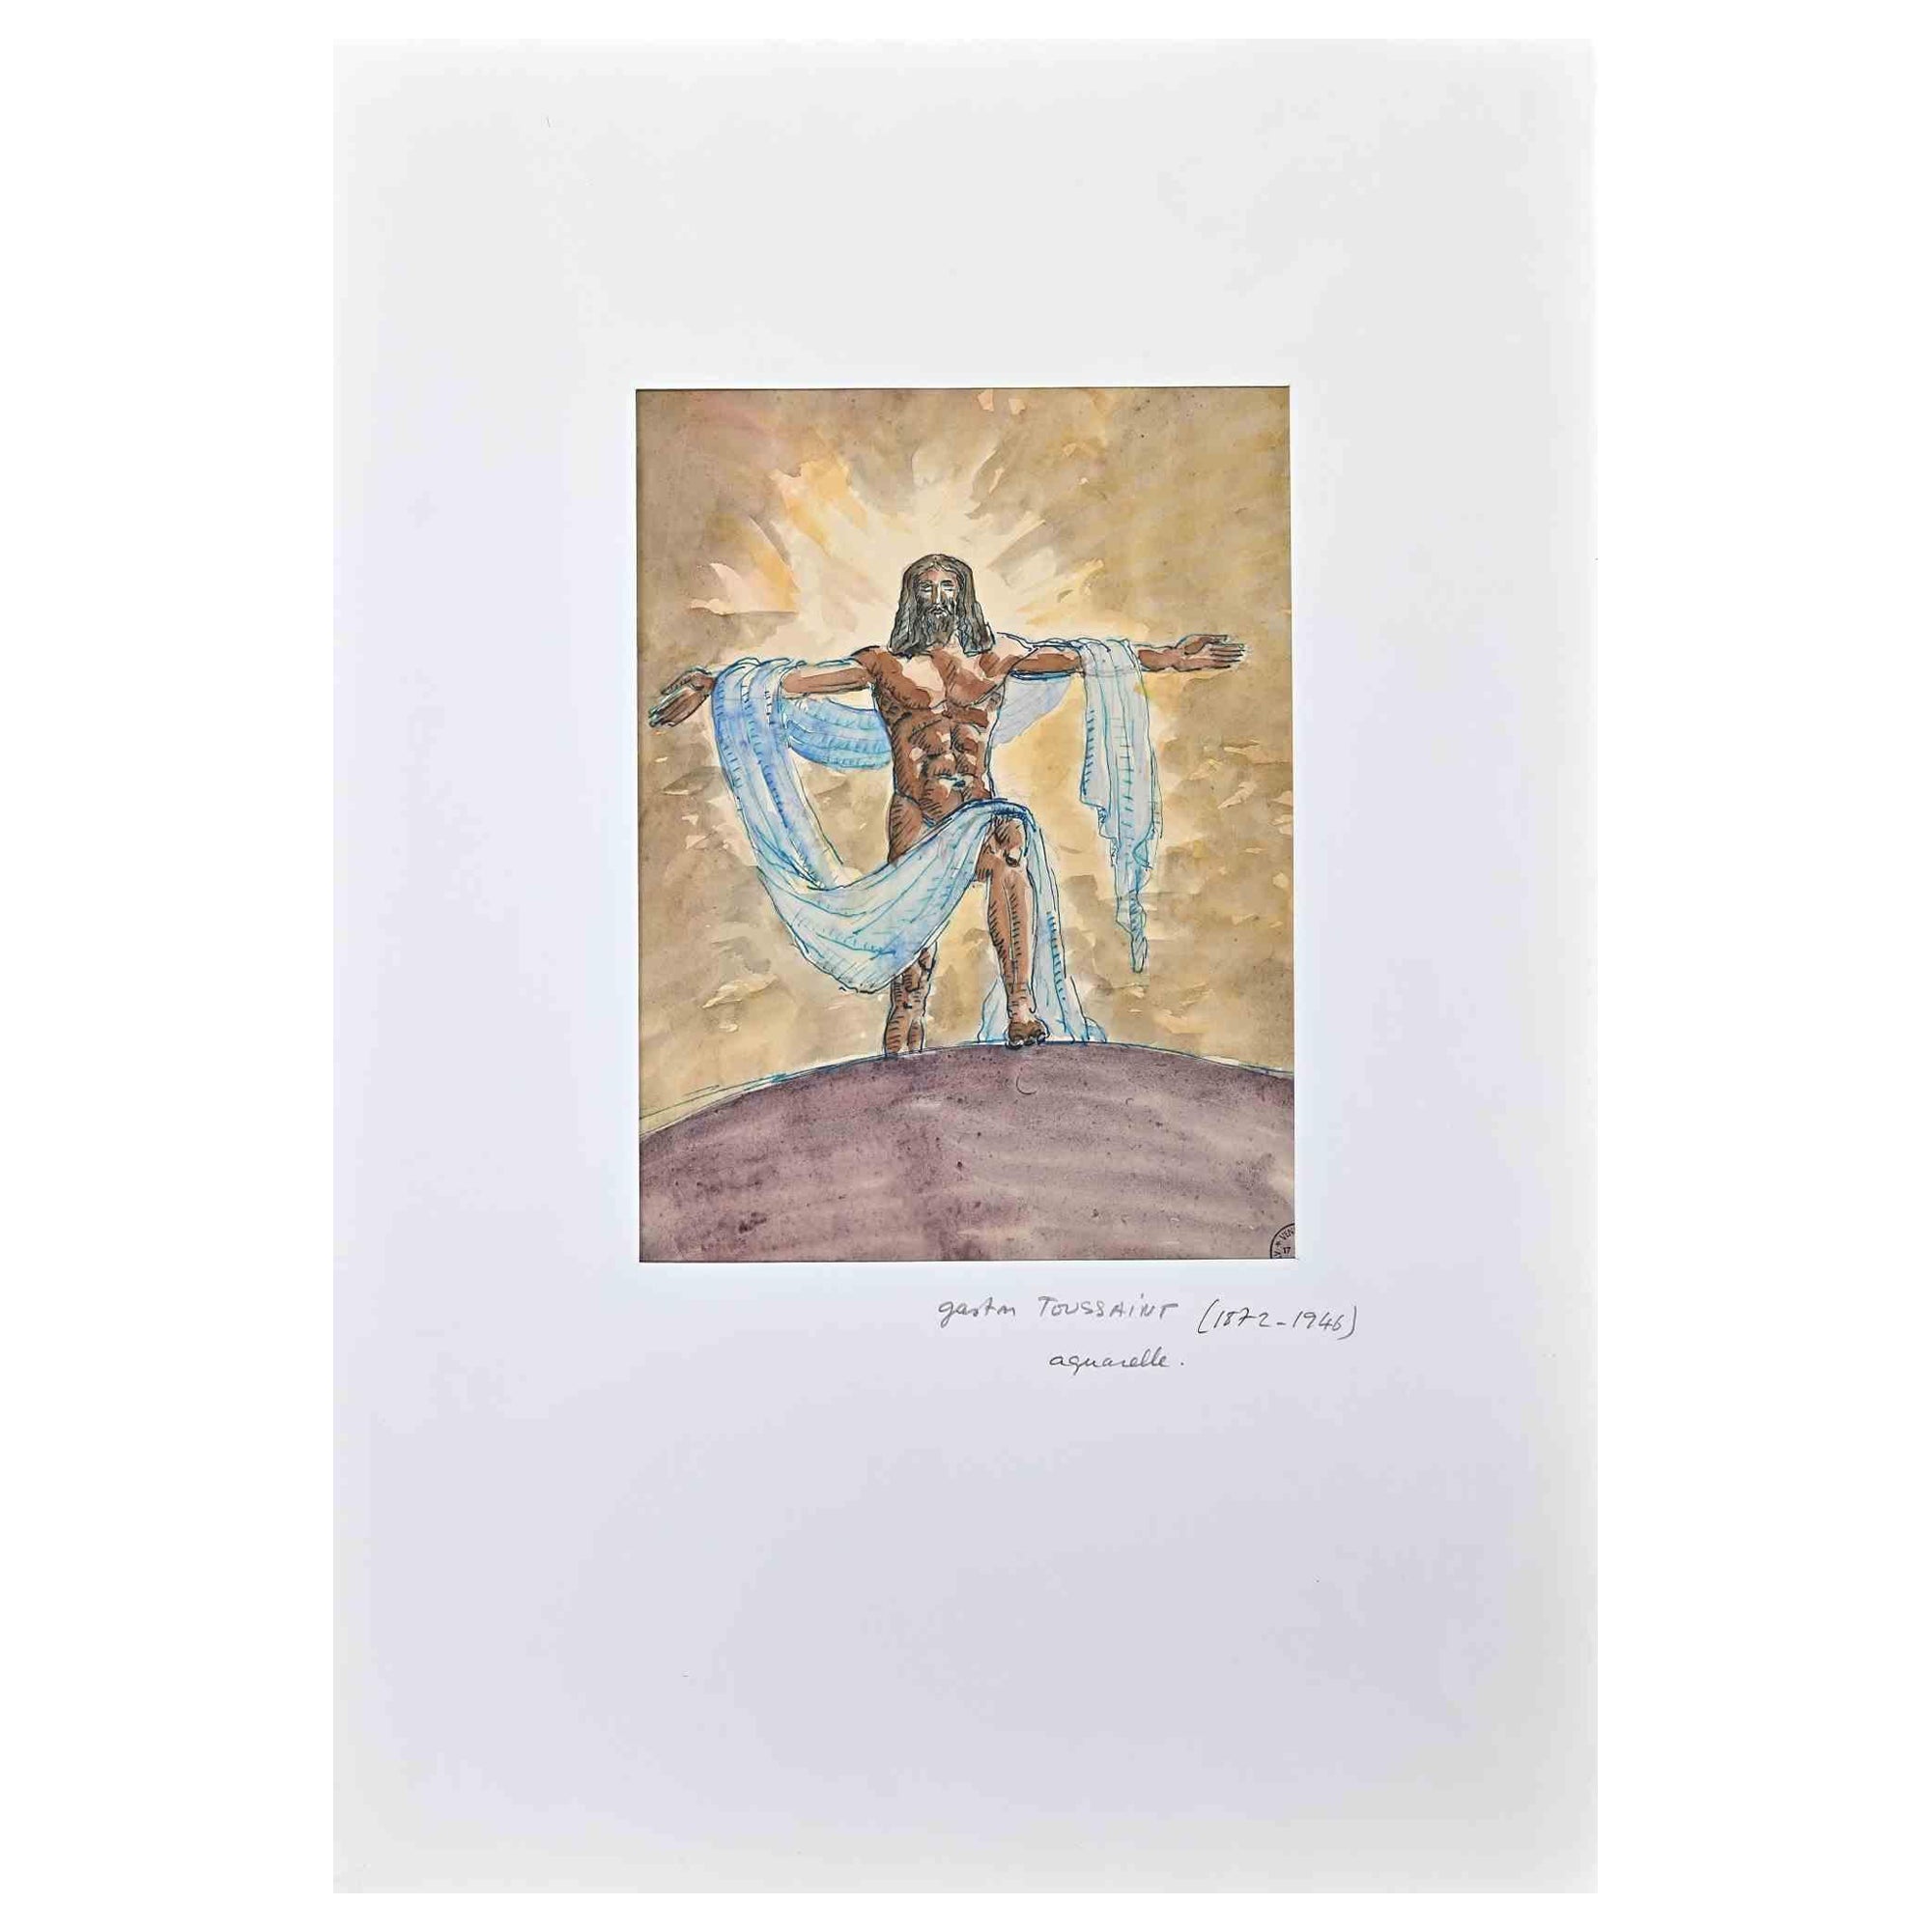 Jesus Christ - Original Drawing by Gaston Touissant - Early 20th Century